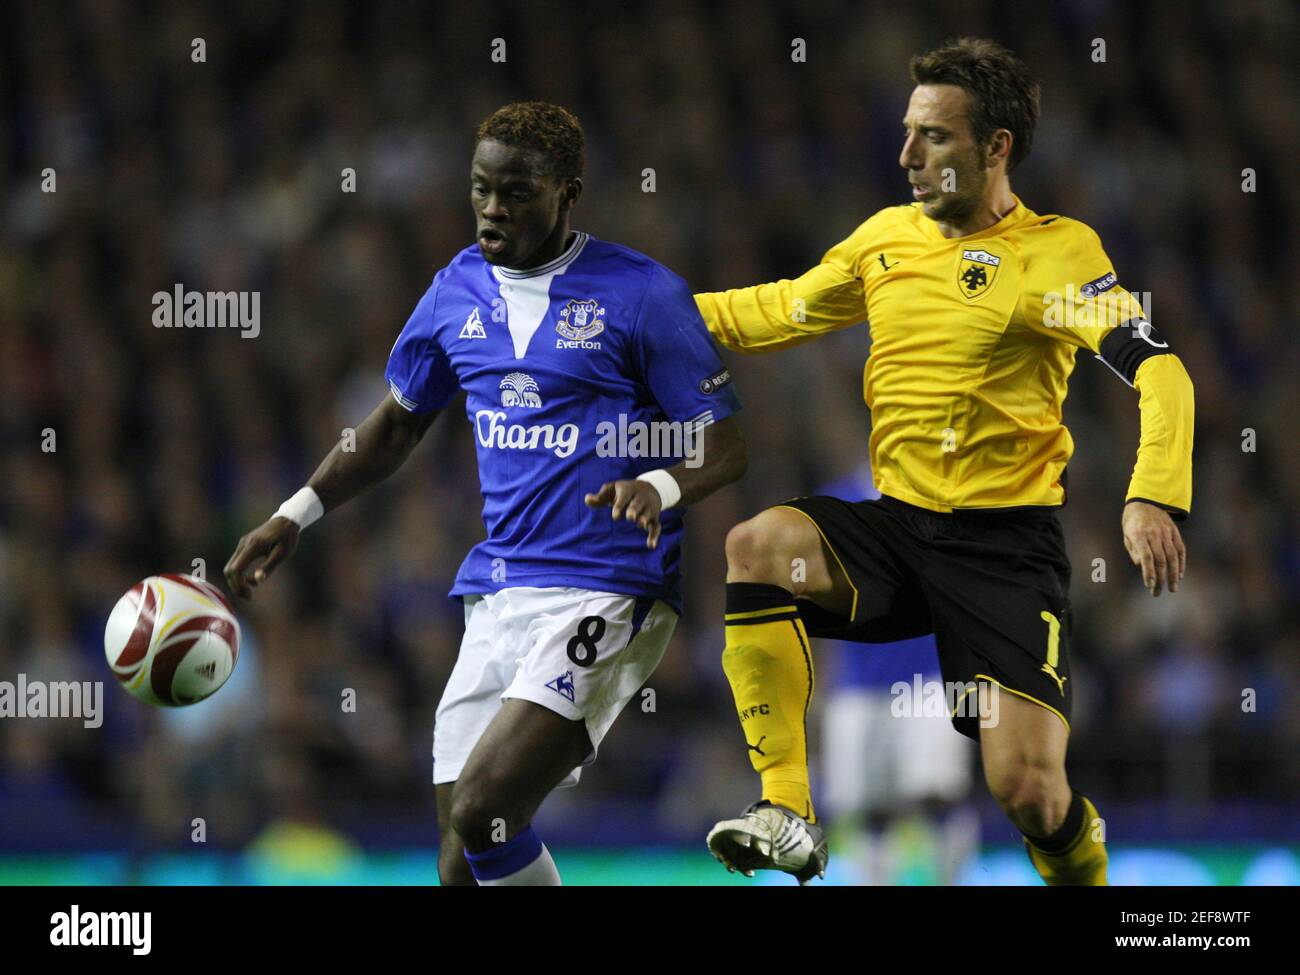 Football - Everton v AEK Athens - UEFA Europa League Group Stage Matchday  One Group I - Goodison Park, Merseyside, England - 09/10 - 17/9/09 Louis  Saha (L) - Everton in action